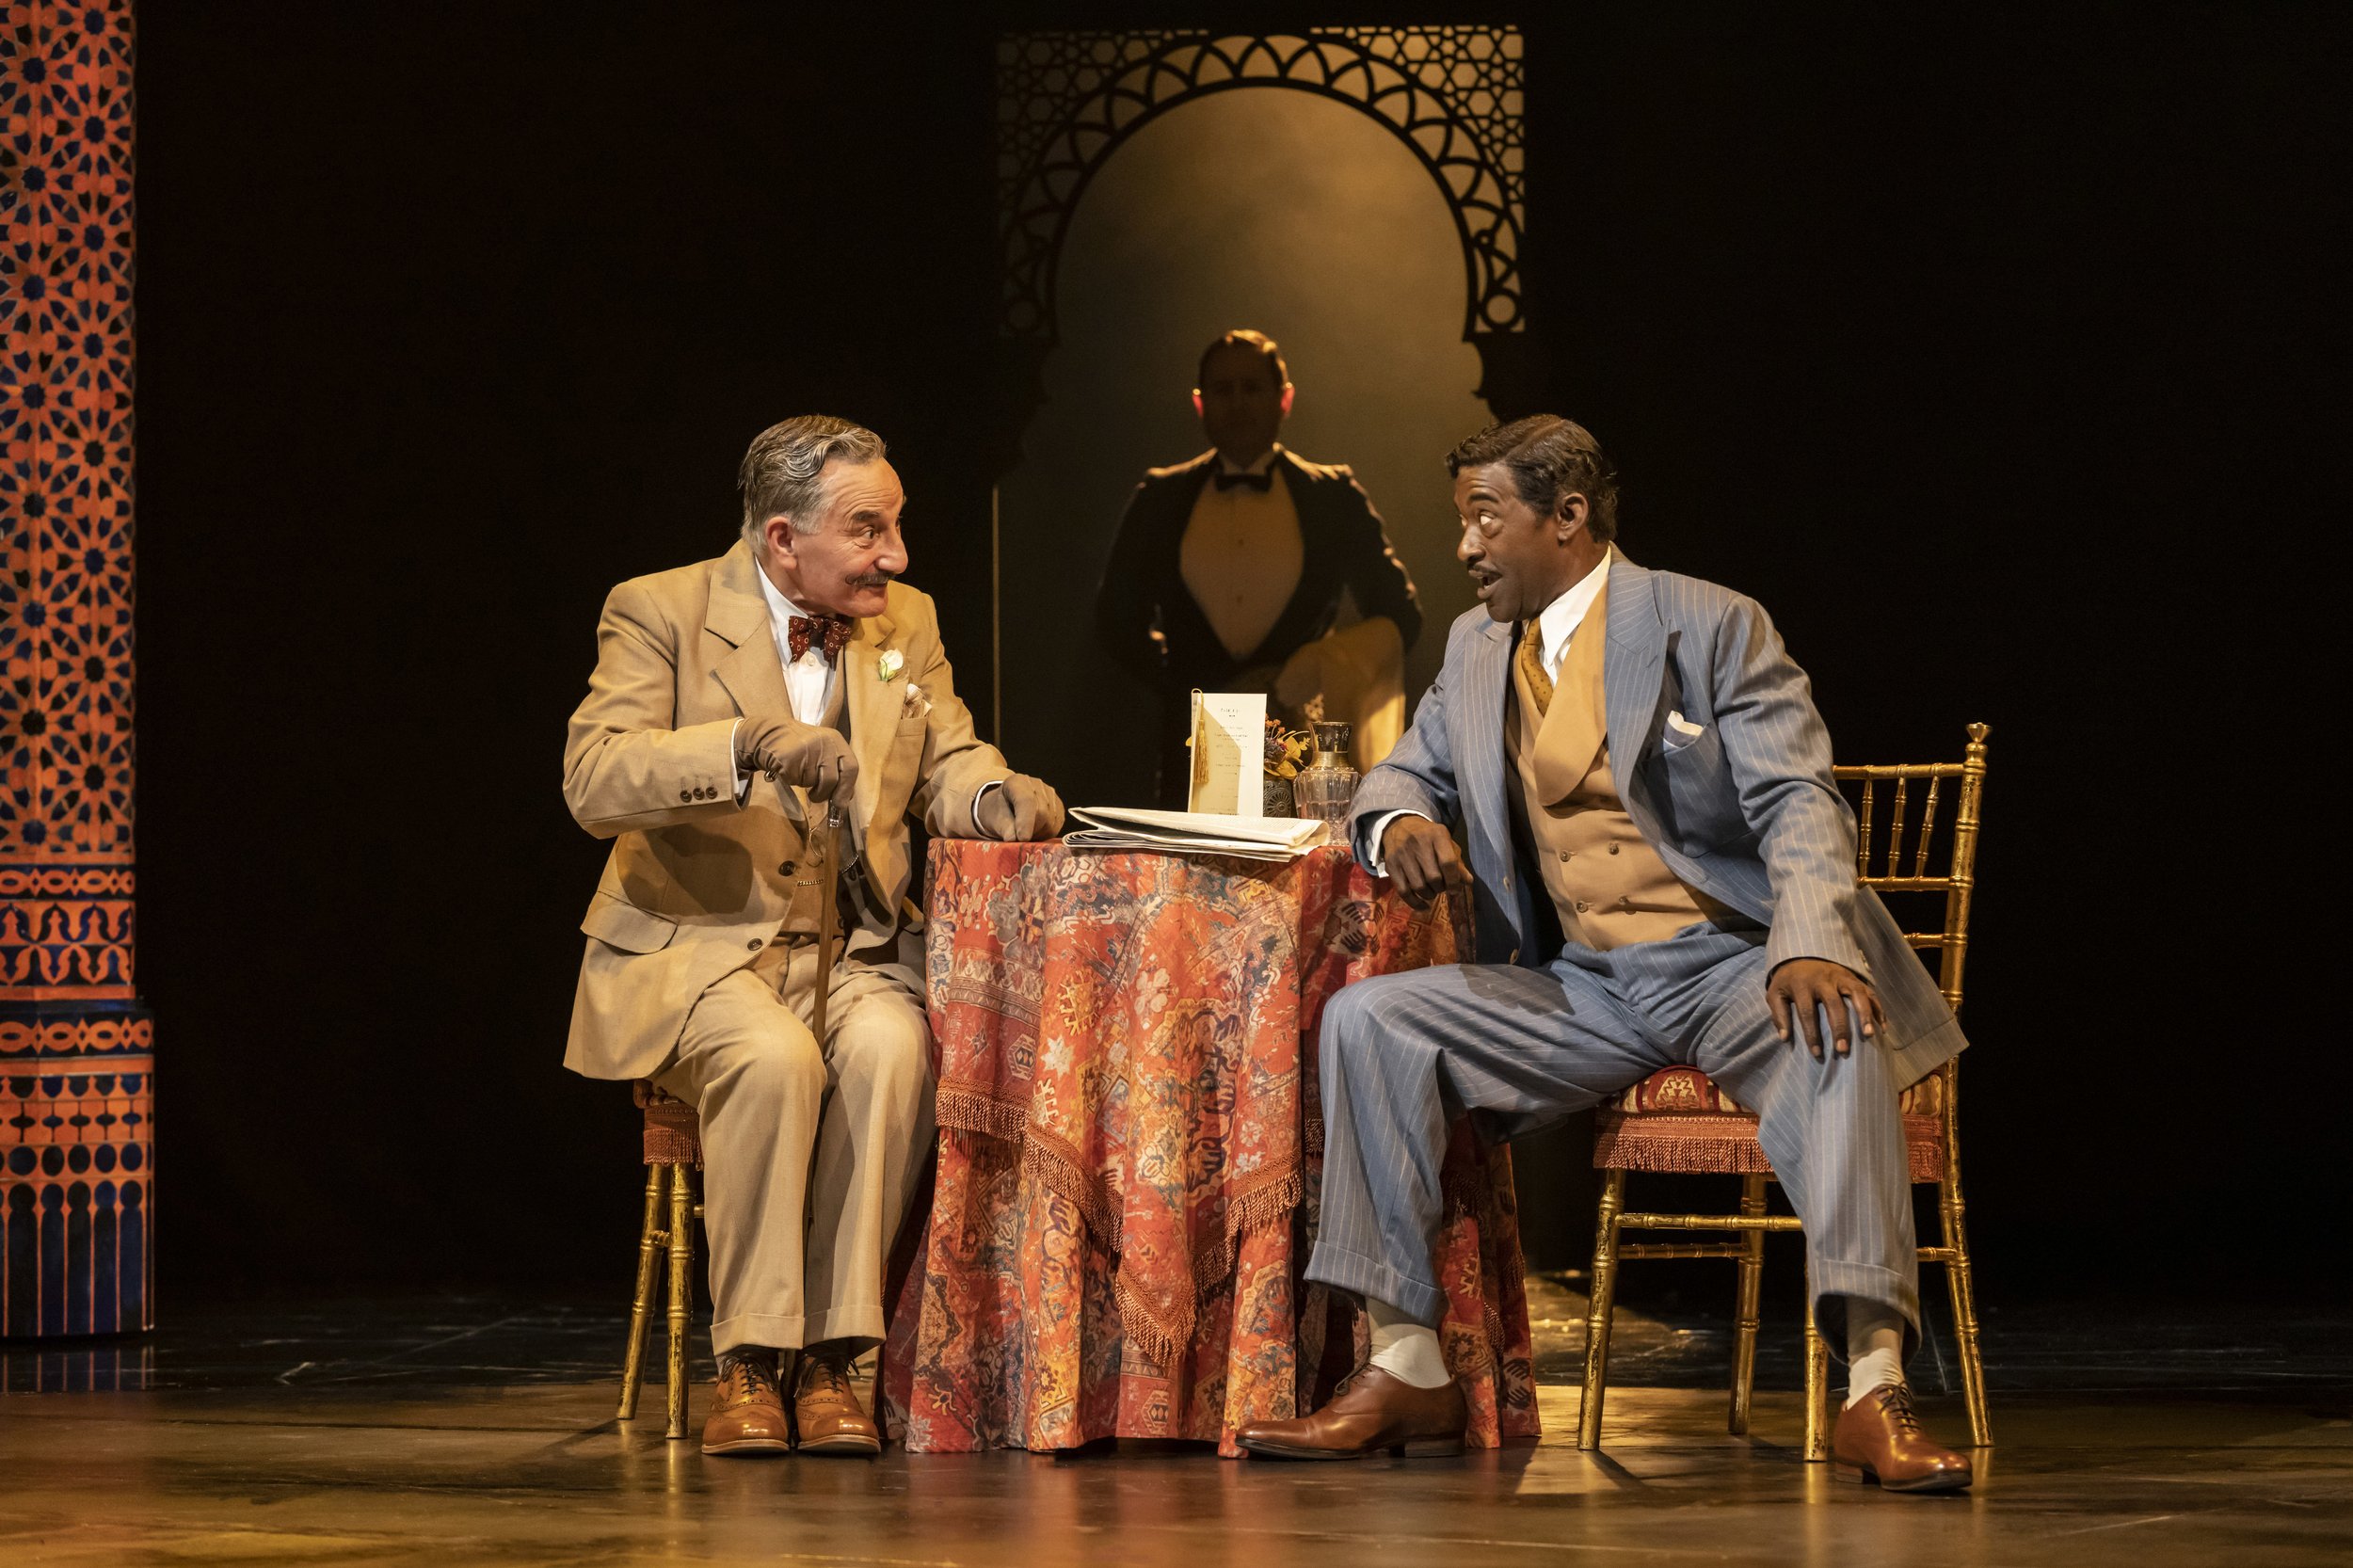 Henry Goodman as Hercule Poirot &amp; Patrick Robinson as Monsieur Bouc in Murder on the Orient Express at Chichester Festival Theatre